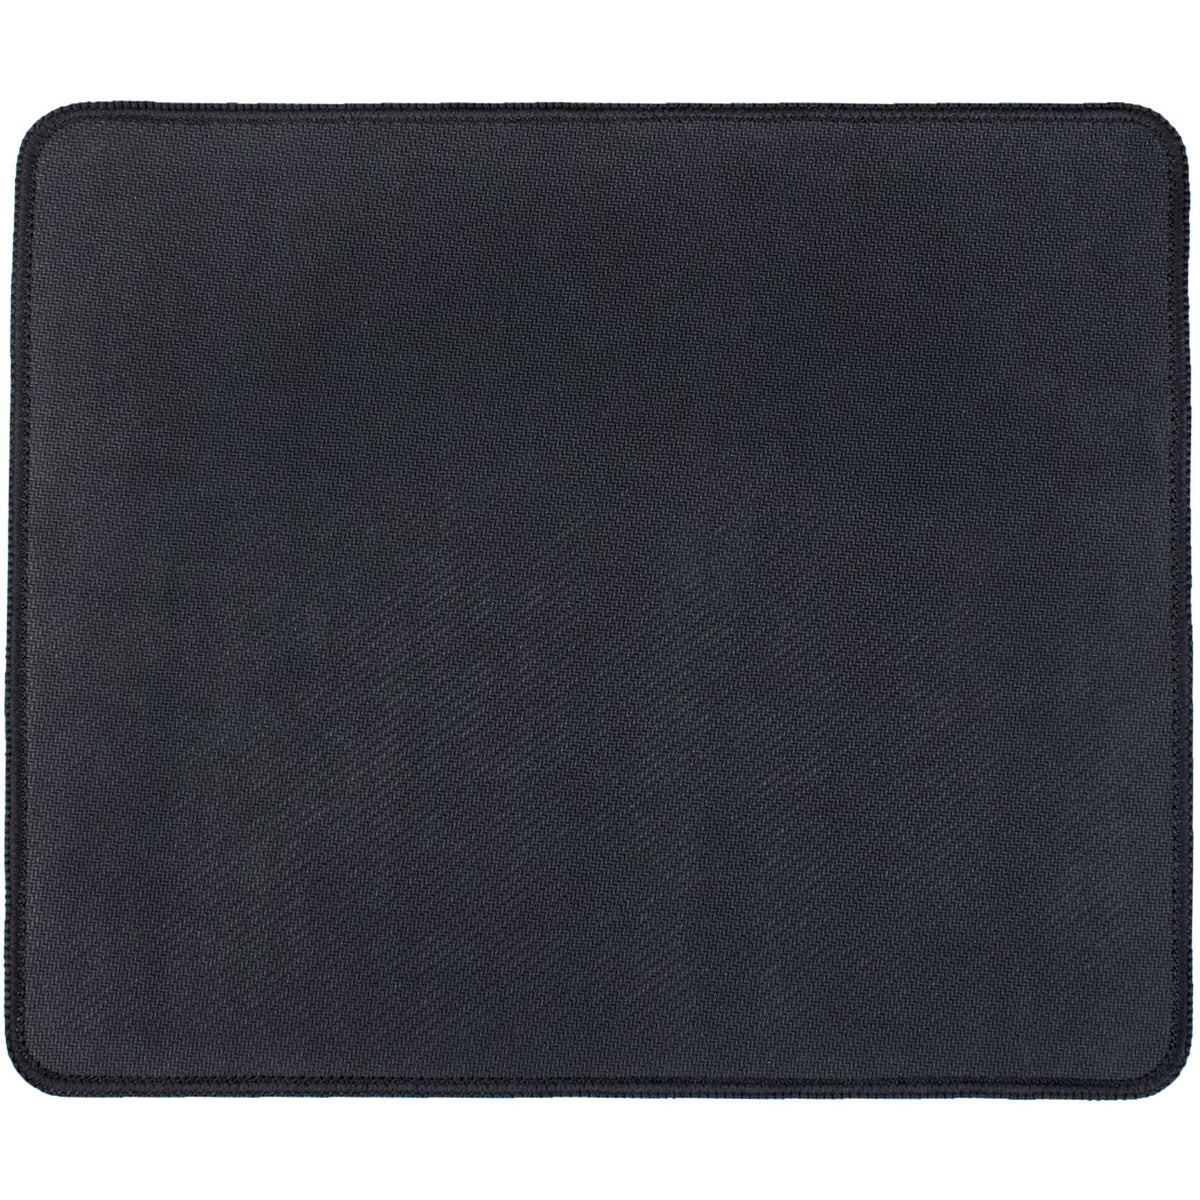 Protec - Padded Neoprene Mouse Mat-Accessories-Protec-Music Elements